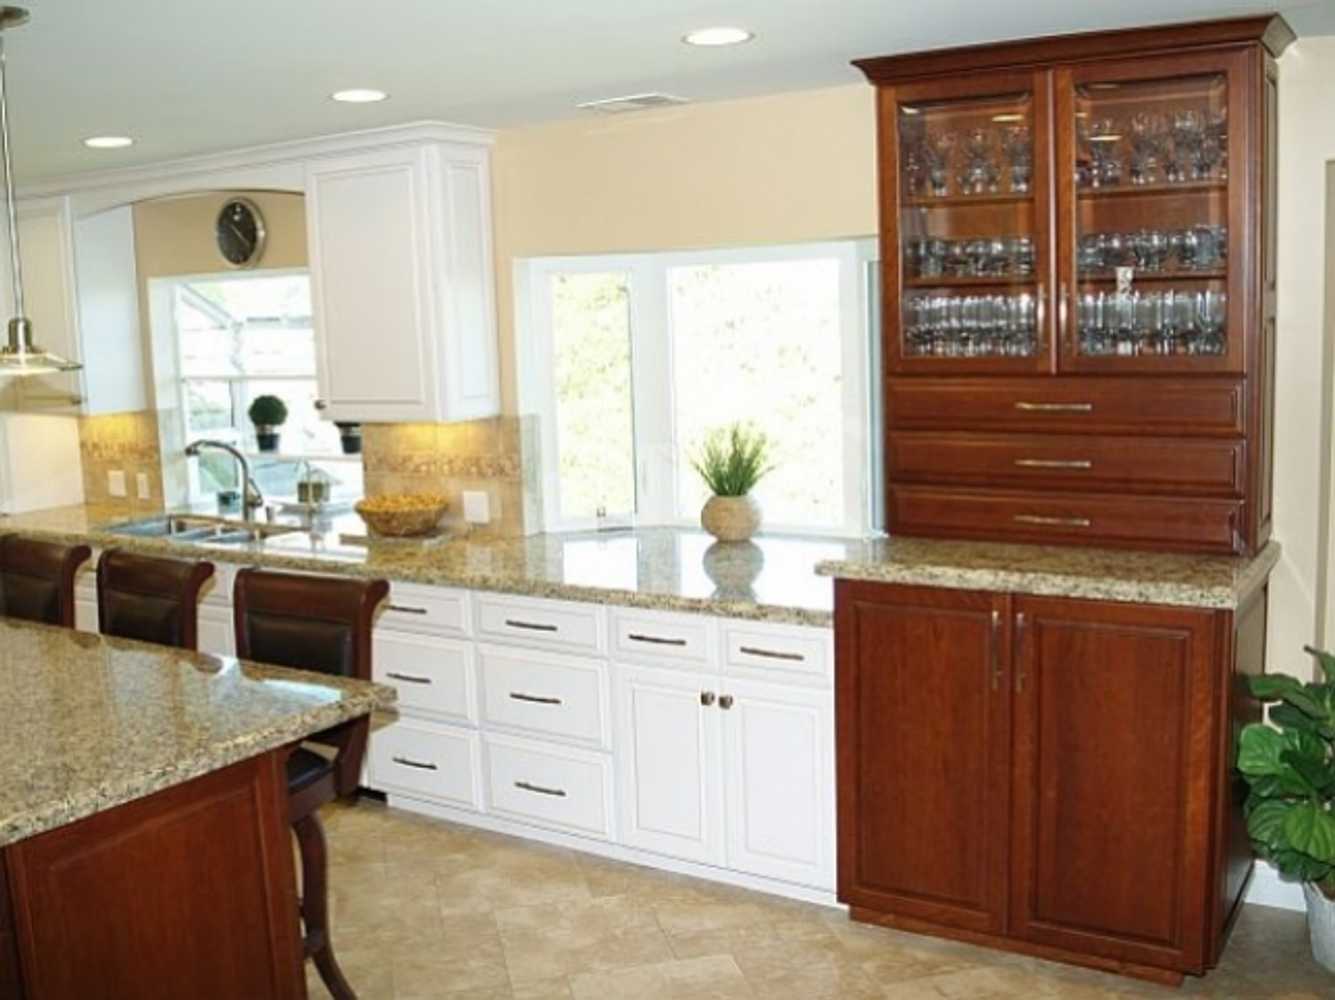 RPV Colt rd. Kitchen project